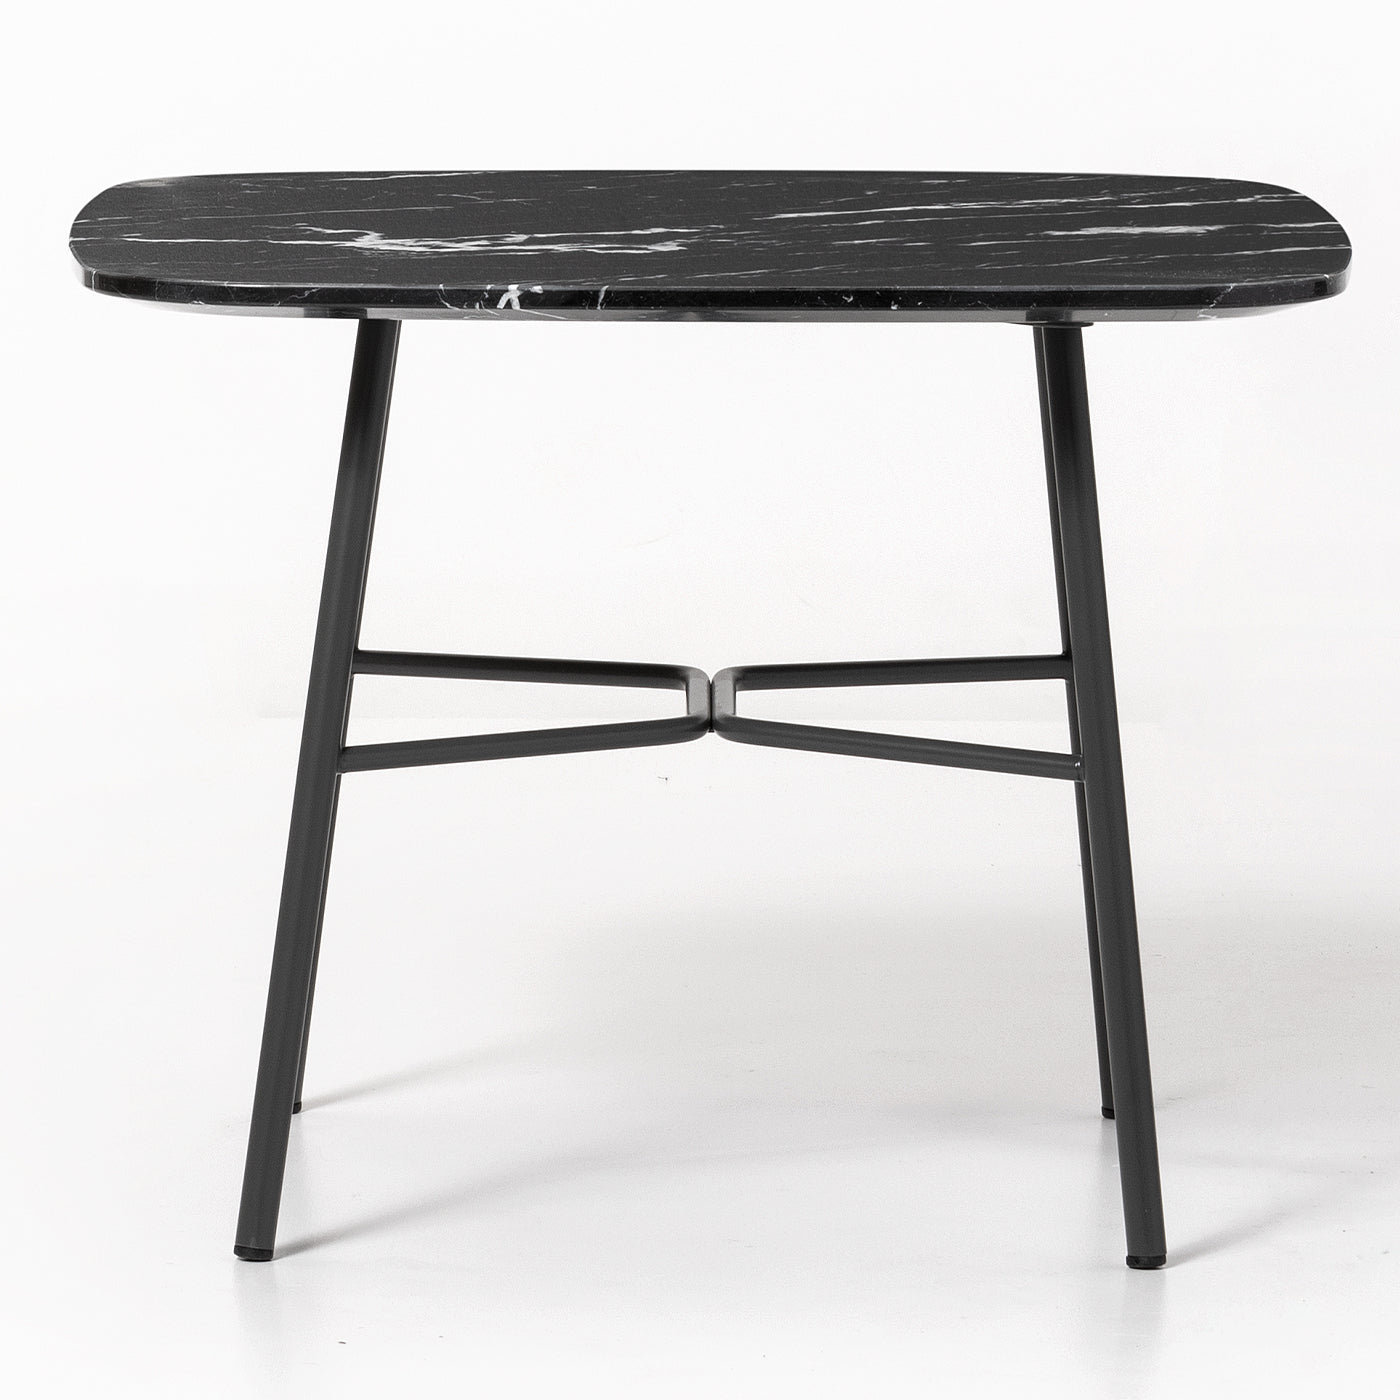 0128 Yuki Square Side Table with Black Marquina Top by Ep Studio - Alternative view 1